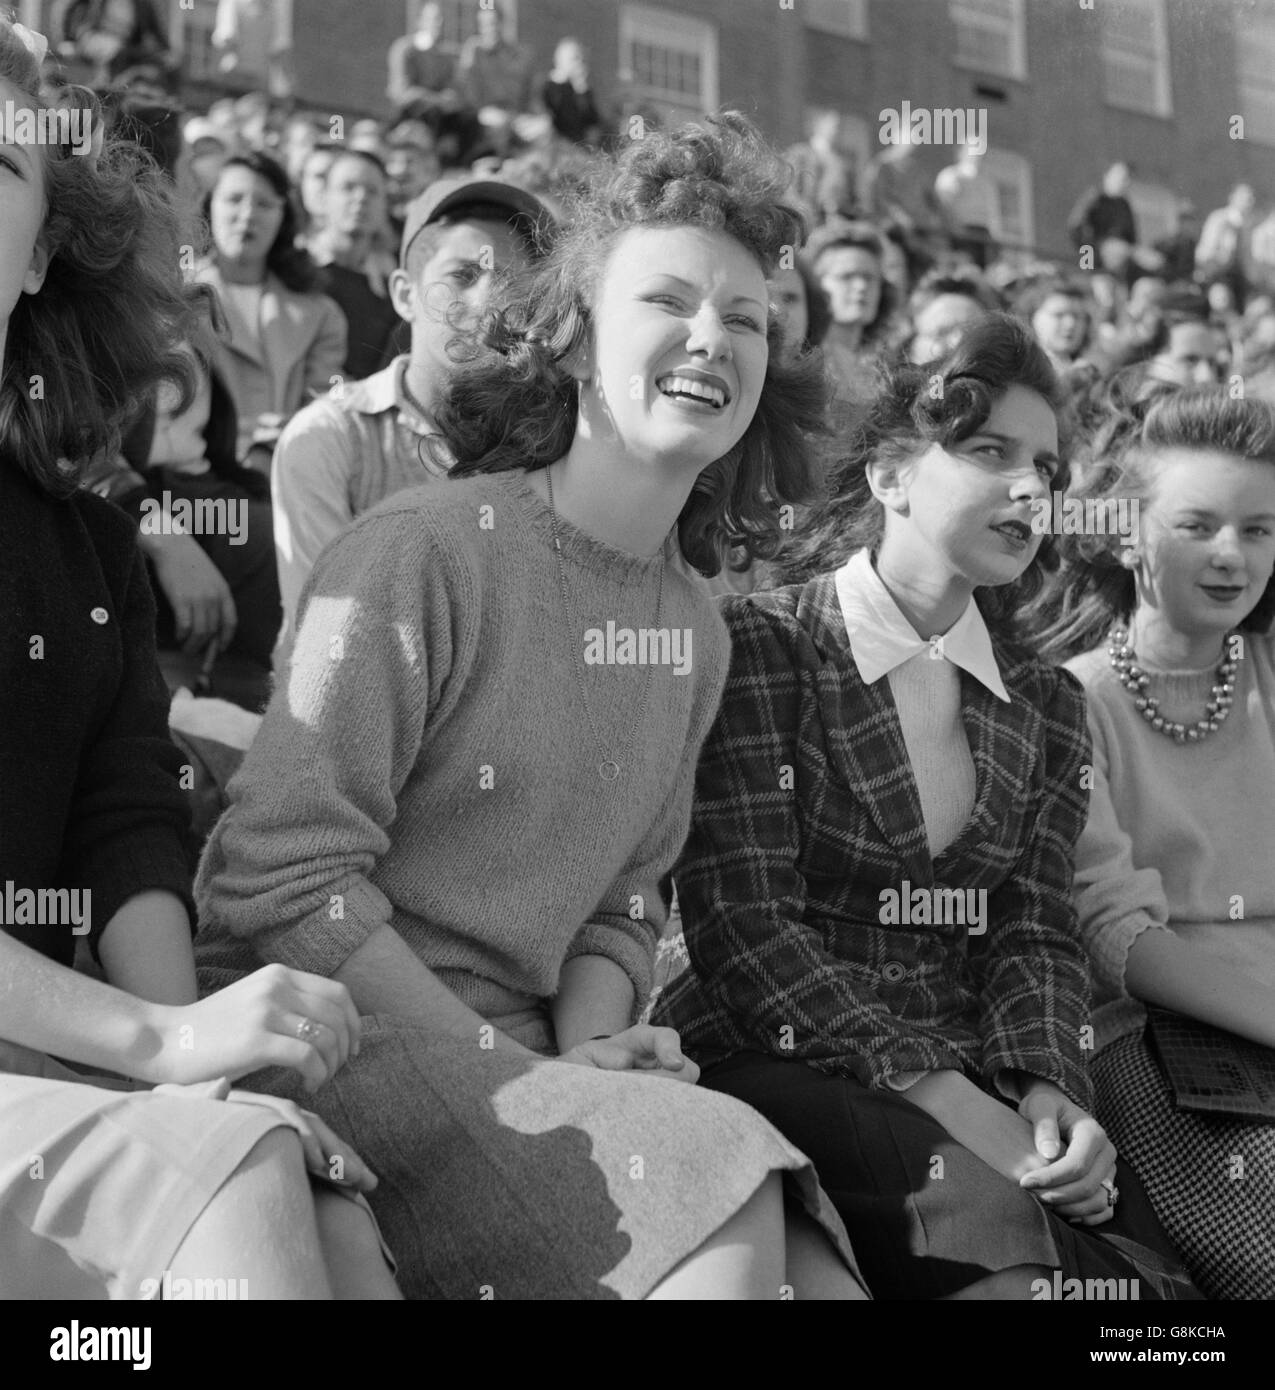 Student Fans Watching High School Football Game, Washington DC, USA, Esther Bubley for Office of War Information, October 1943 Stock Photo